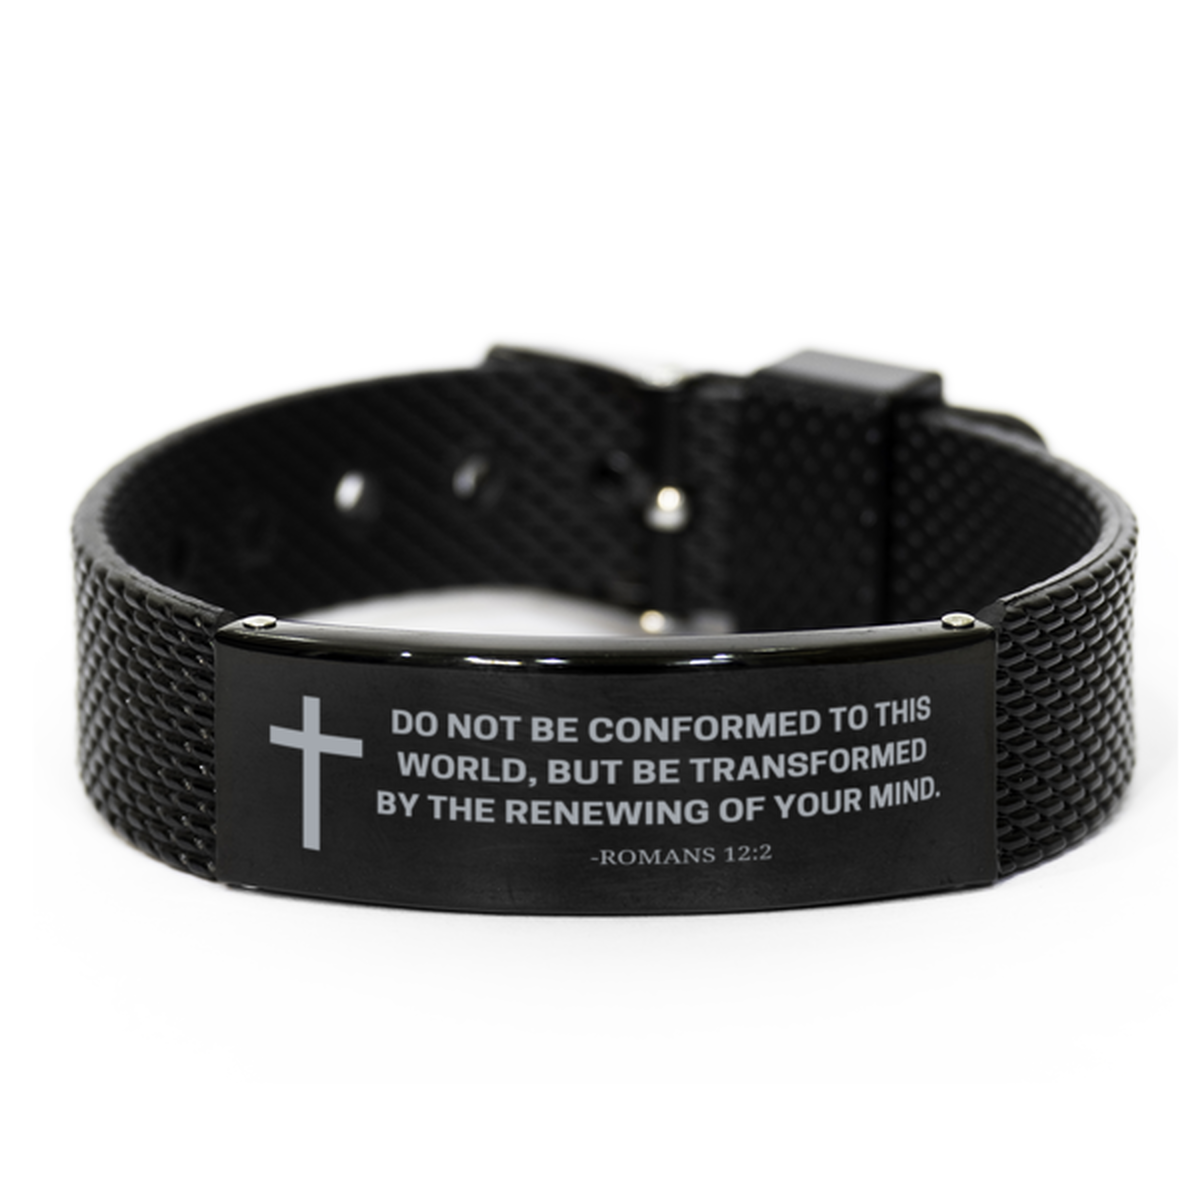 Baptism Gifts For Teenage Boys Girls, Christian Bible Verse Black Shark Mesh Bracelet, Do not be conformed to this world, Catholic Confirmation Gifts for Son, Godson, Grandson, Nephew